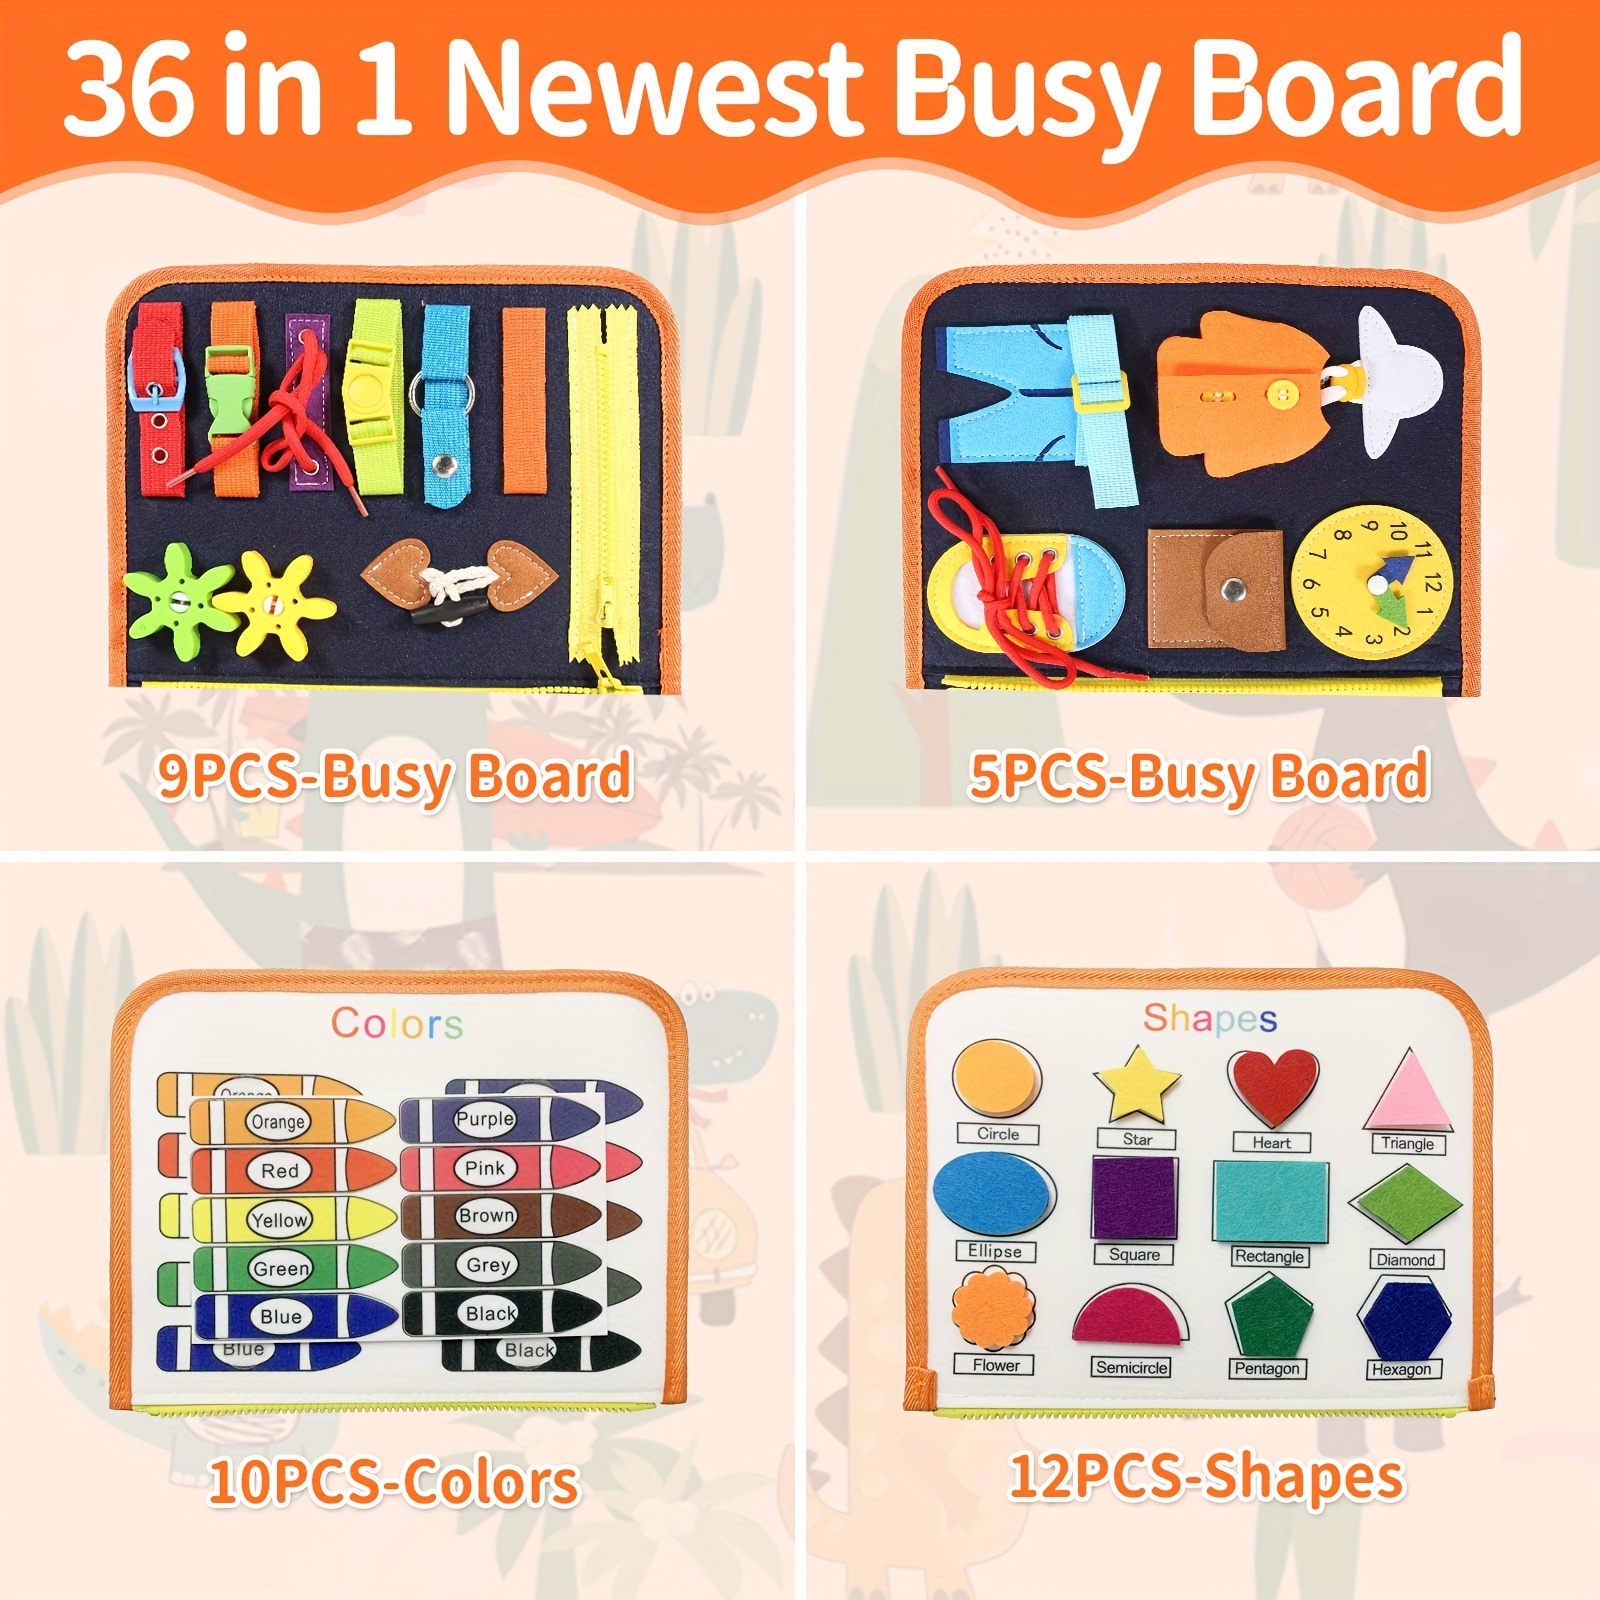 DIY Busy Board for Toddlers